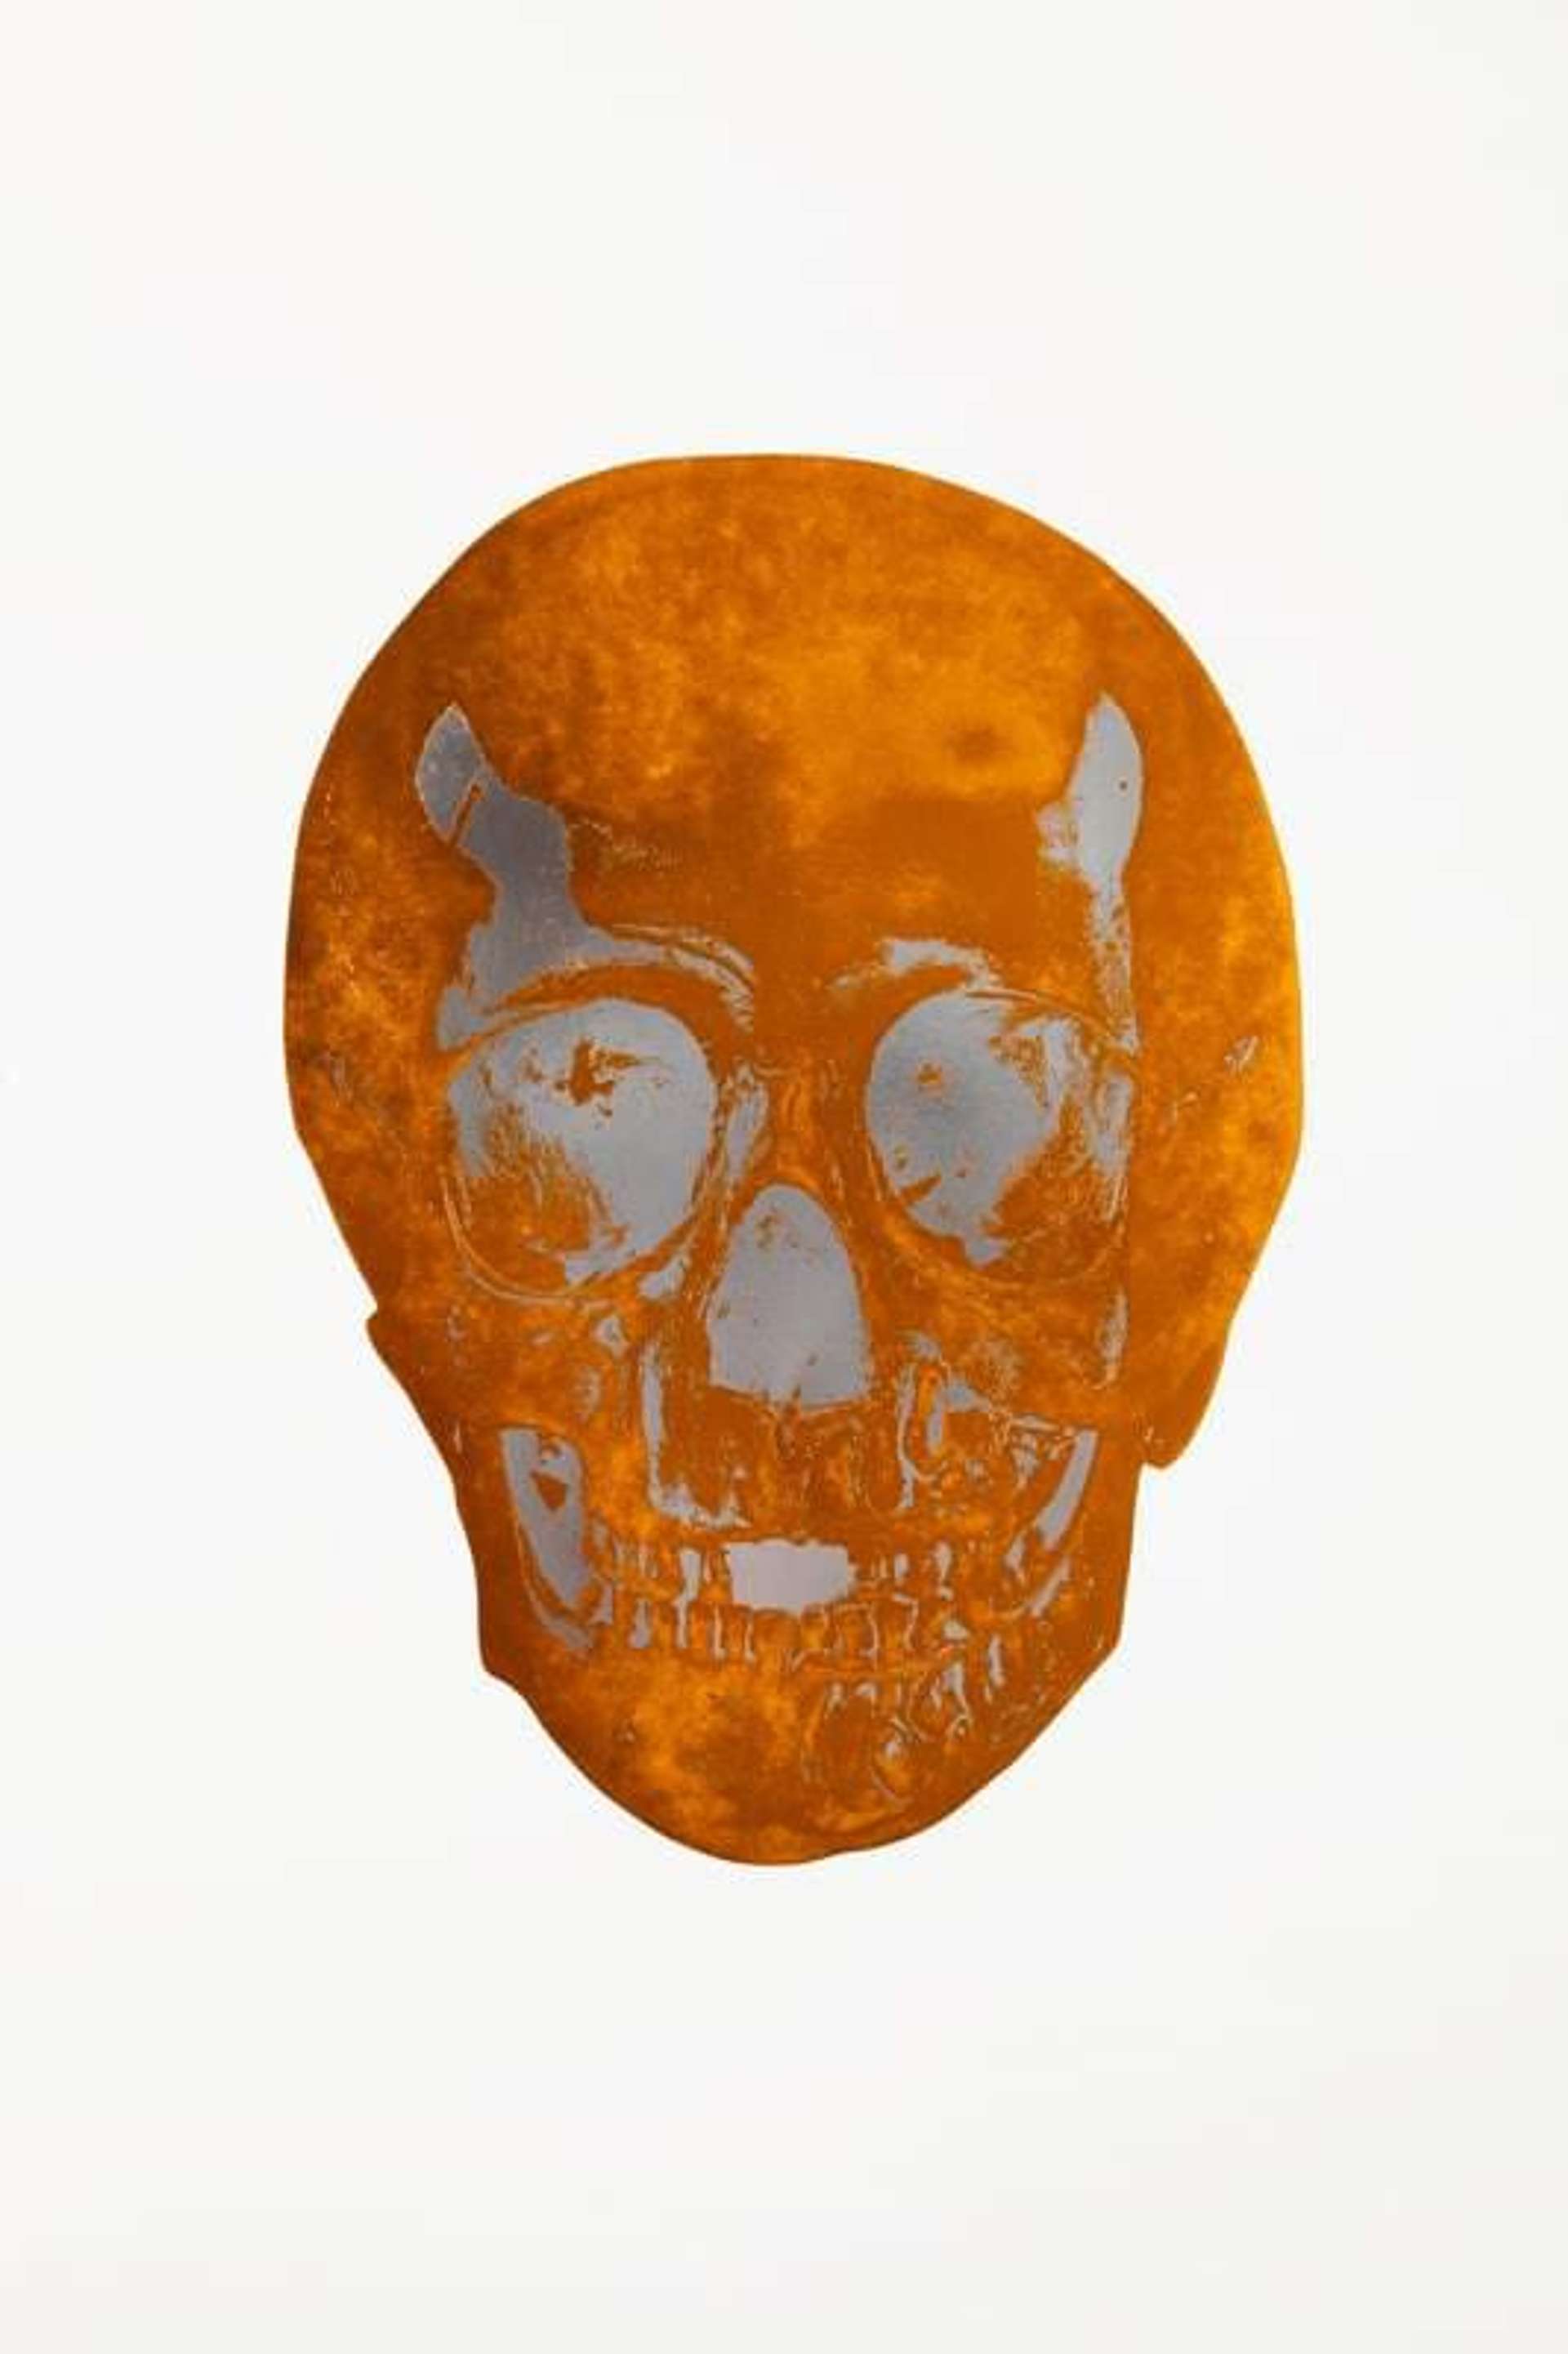 Damien Hirst: The Dead (island copper, silver gloss) - Signed Print